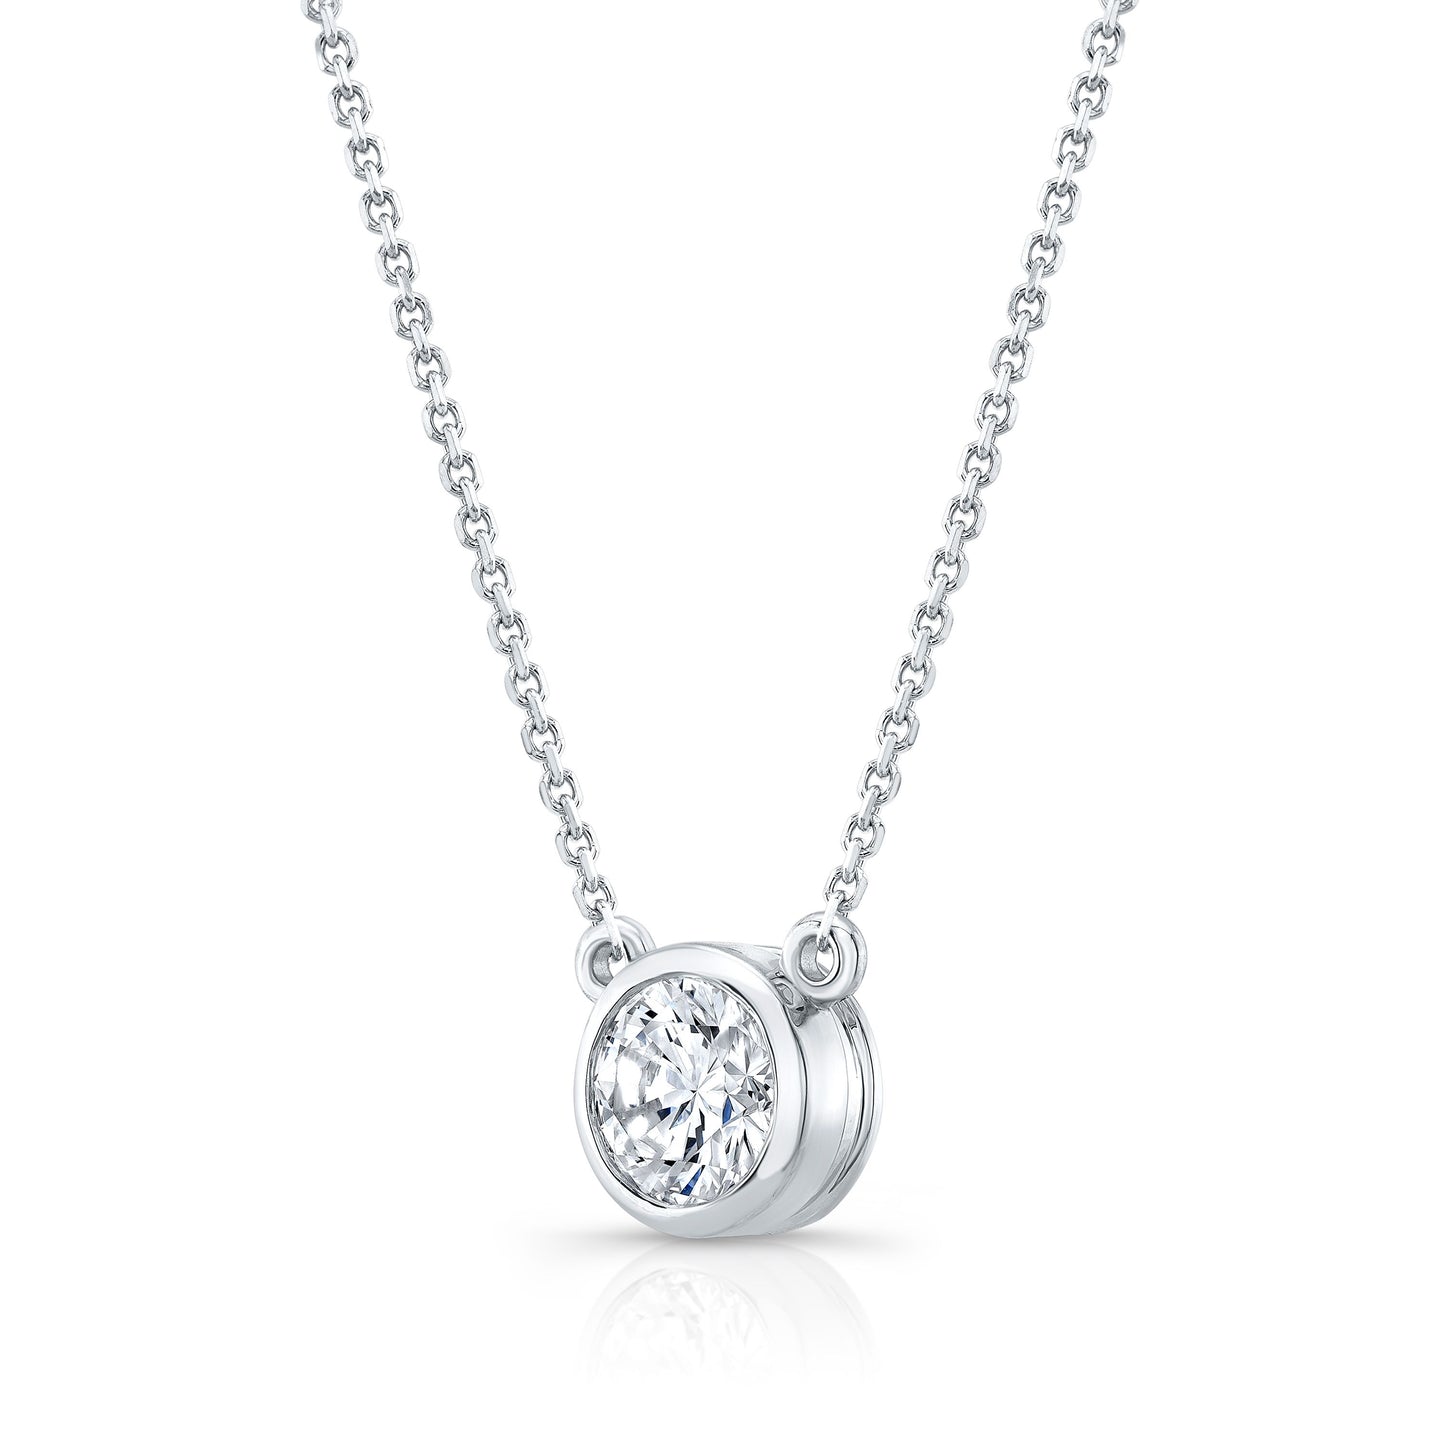 Round (full Cut) Diamond Solitaire Pendant In A 14k White Gold Bezel Centered Setting, 1.25ct. T.w. (hi, Si1-si2)